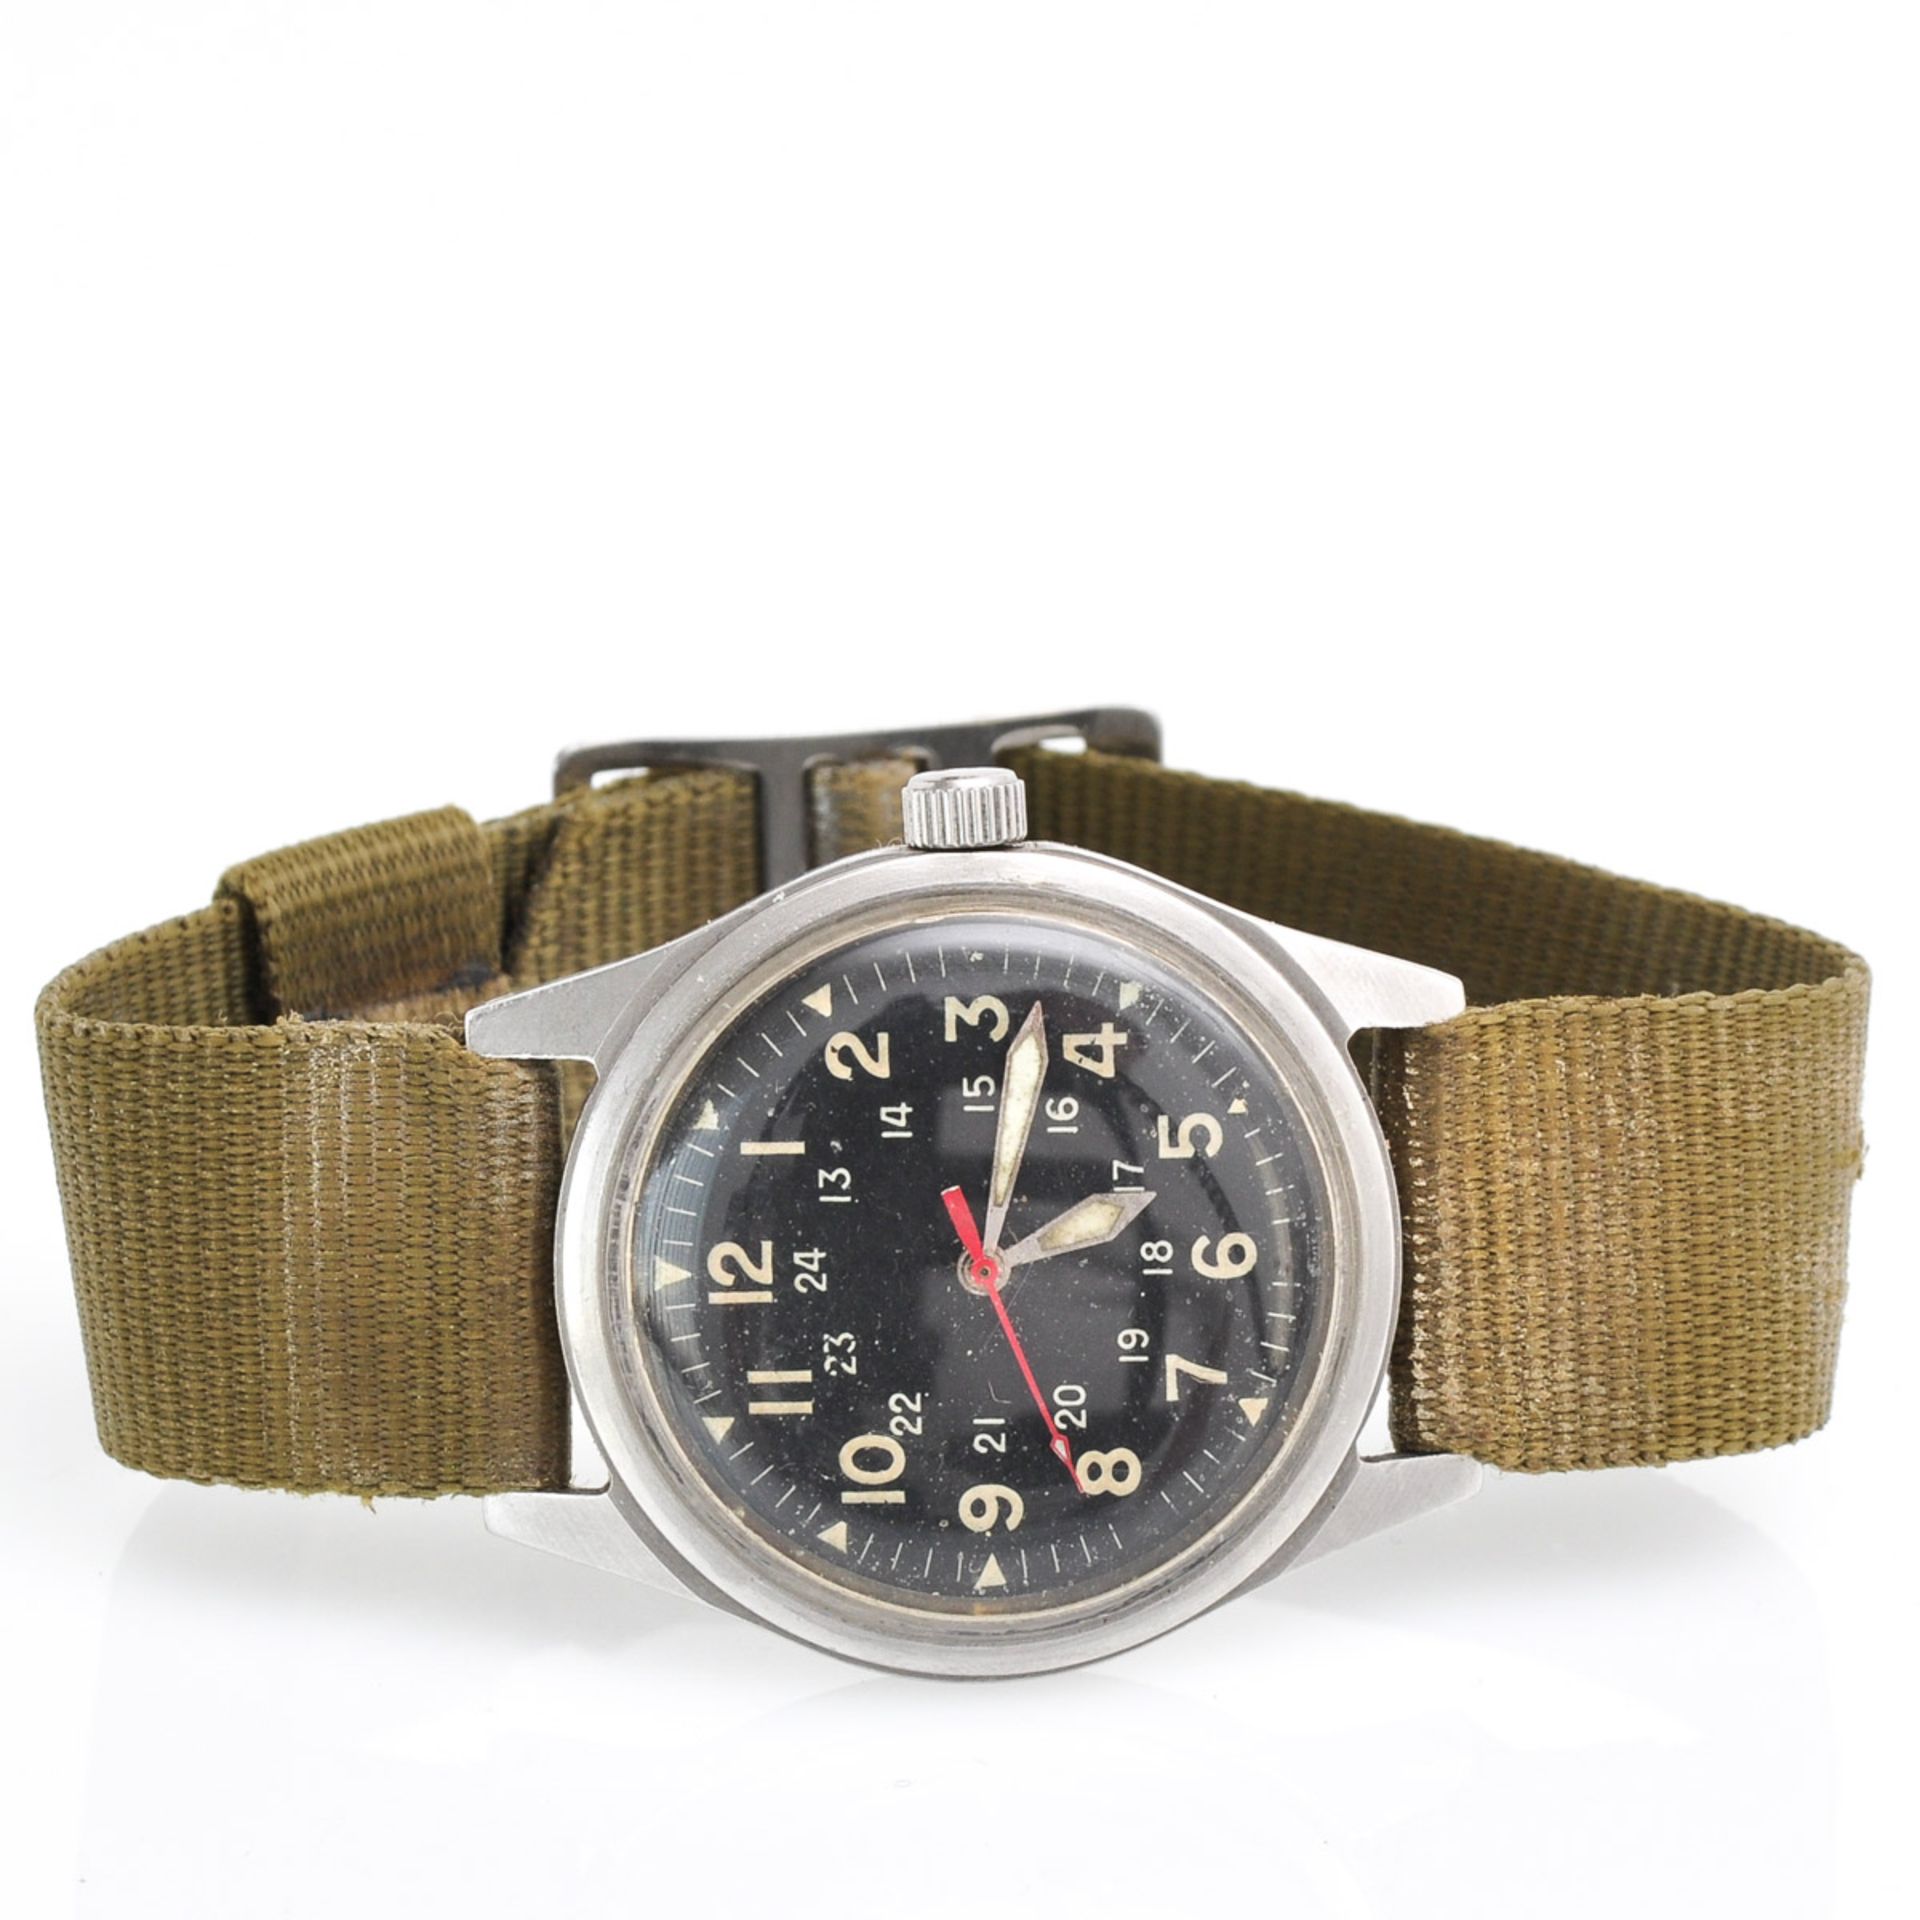 A Mens American Military Watch